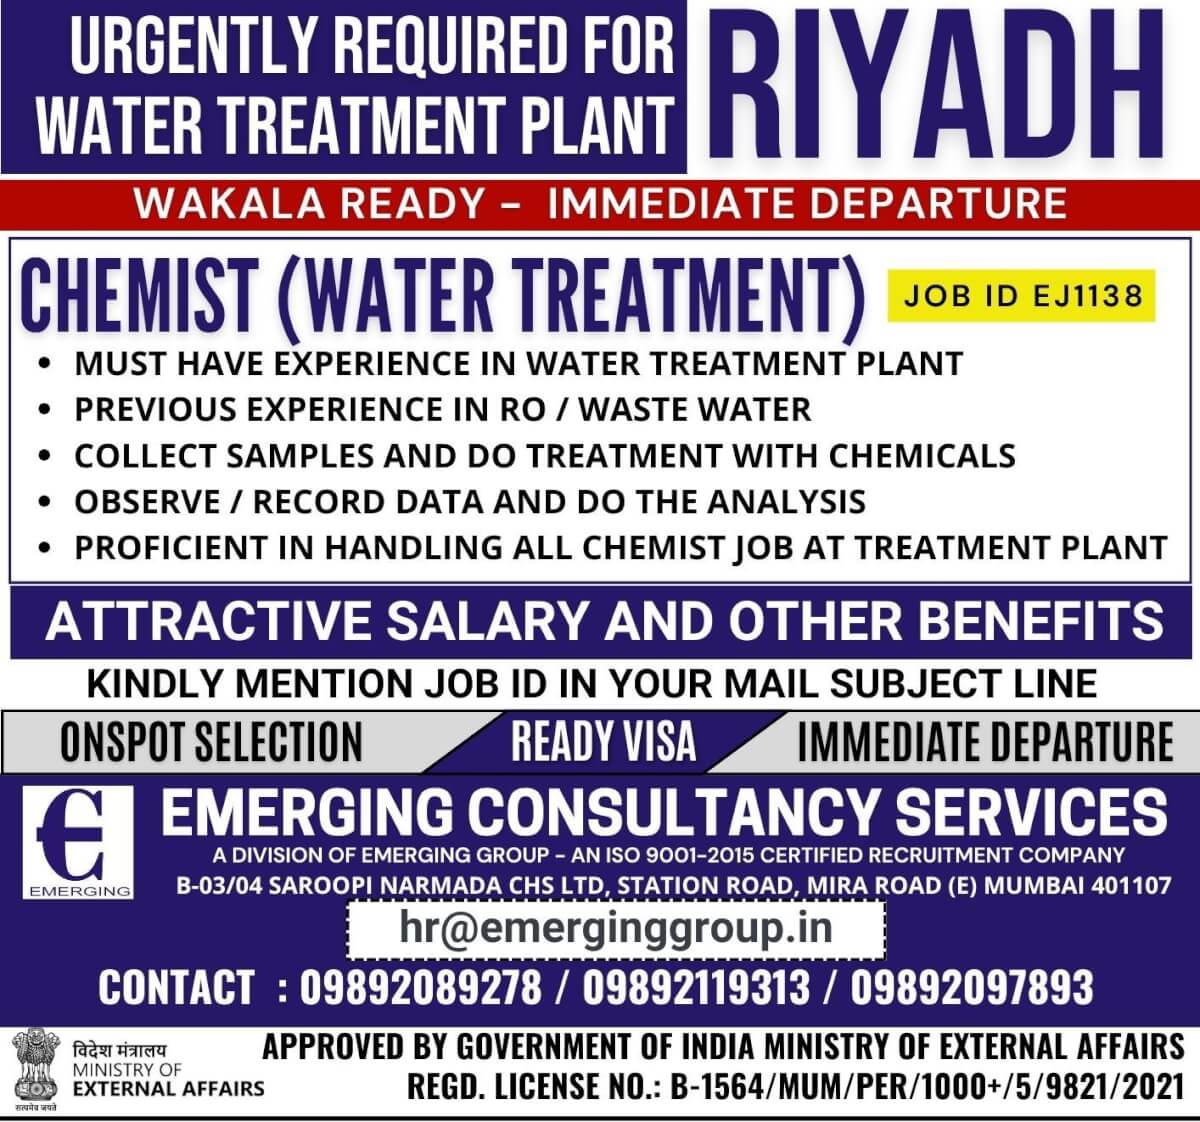 URGENTLY REQUIRED FOR WATER TREATMENT PLANT IN SAUDI ARABIA